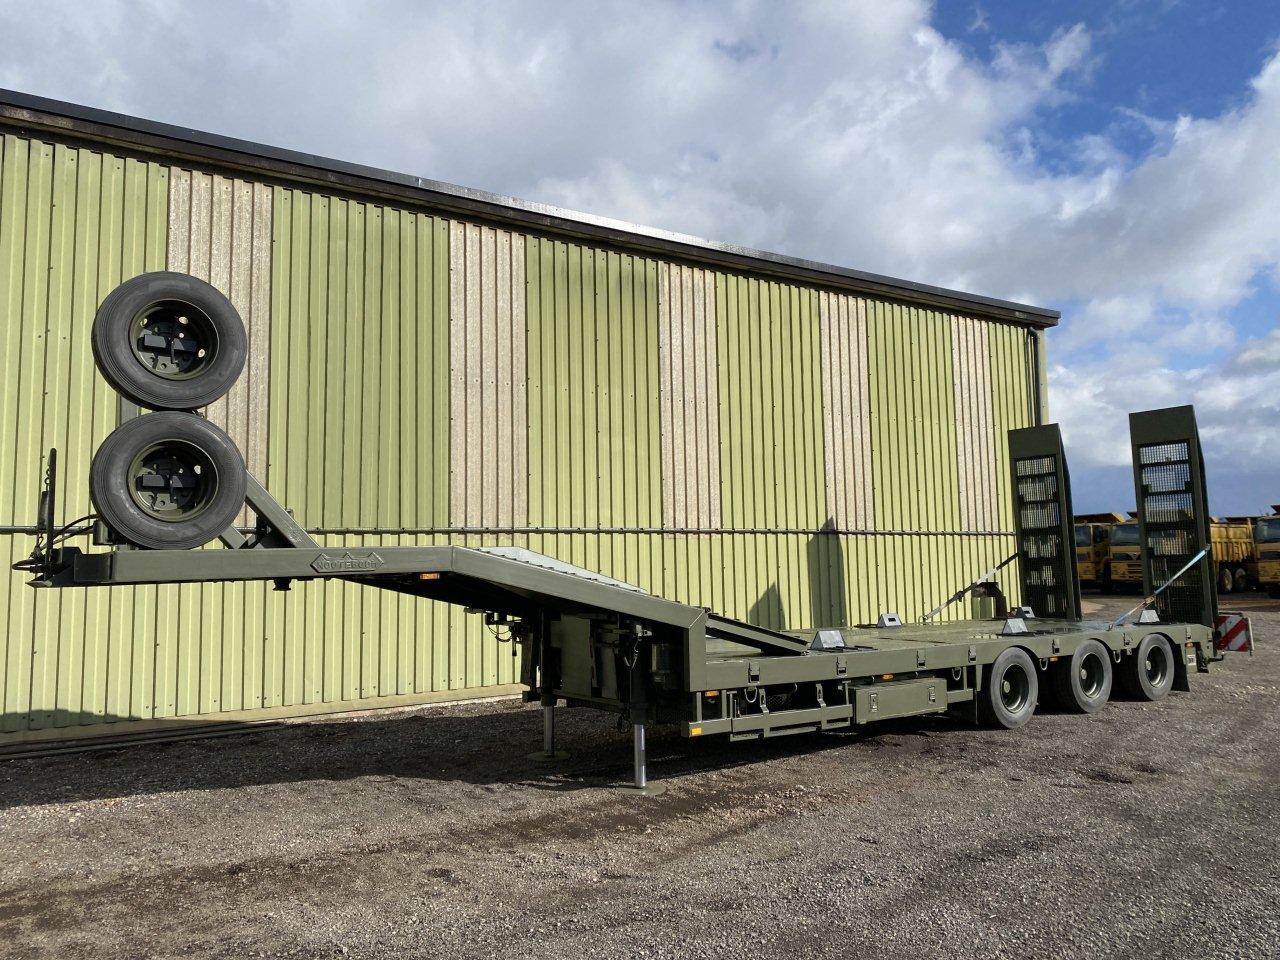 Nooteboom Semi Low Loader Trailer - Govsales of mod surplus ex army trucks, ex army land rovers and other military vehicles for sale